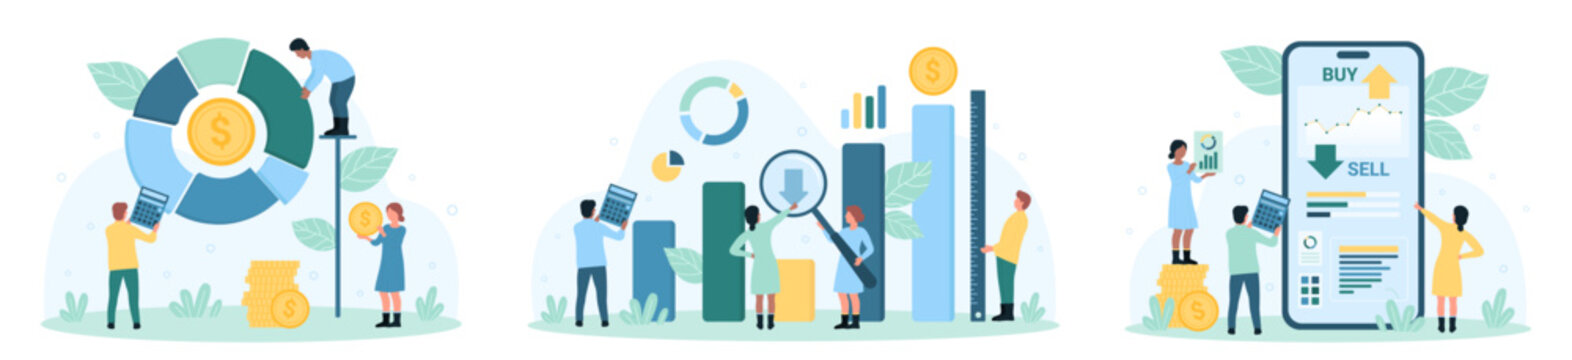 Finance, economic analysis set vector illustration. Cartoon tiny people trade using financial charts and dashboard information in trading platform mobile app, calculate money profit on calculator